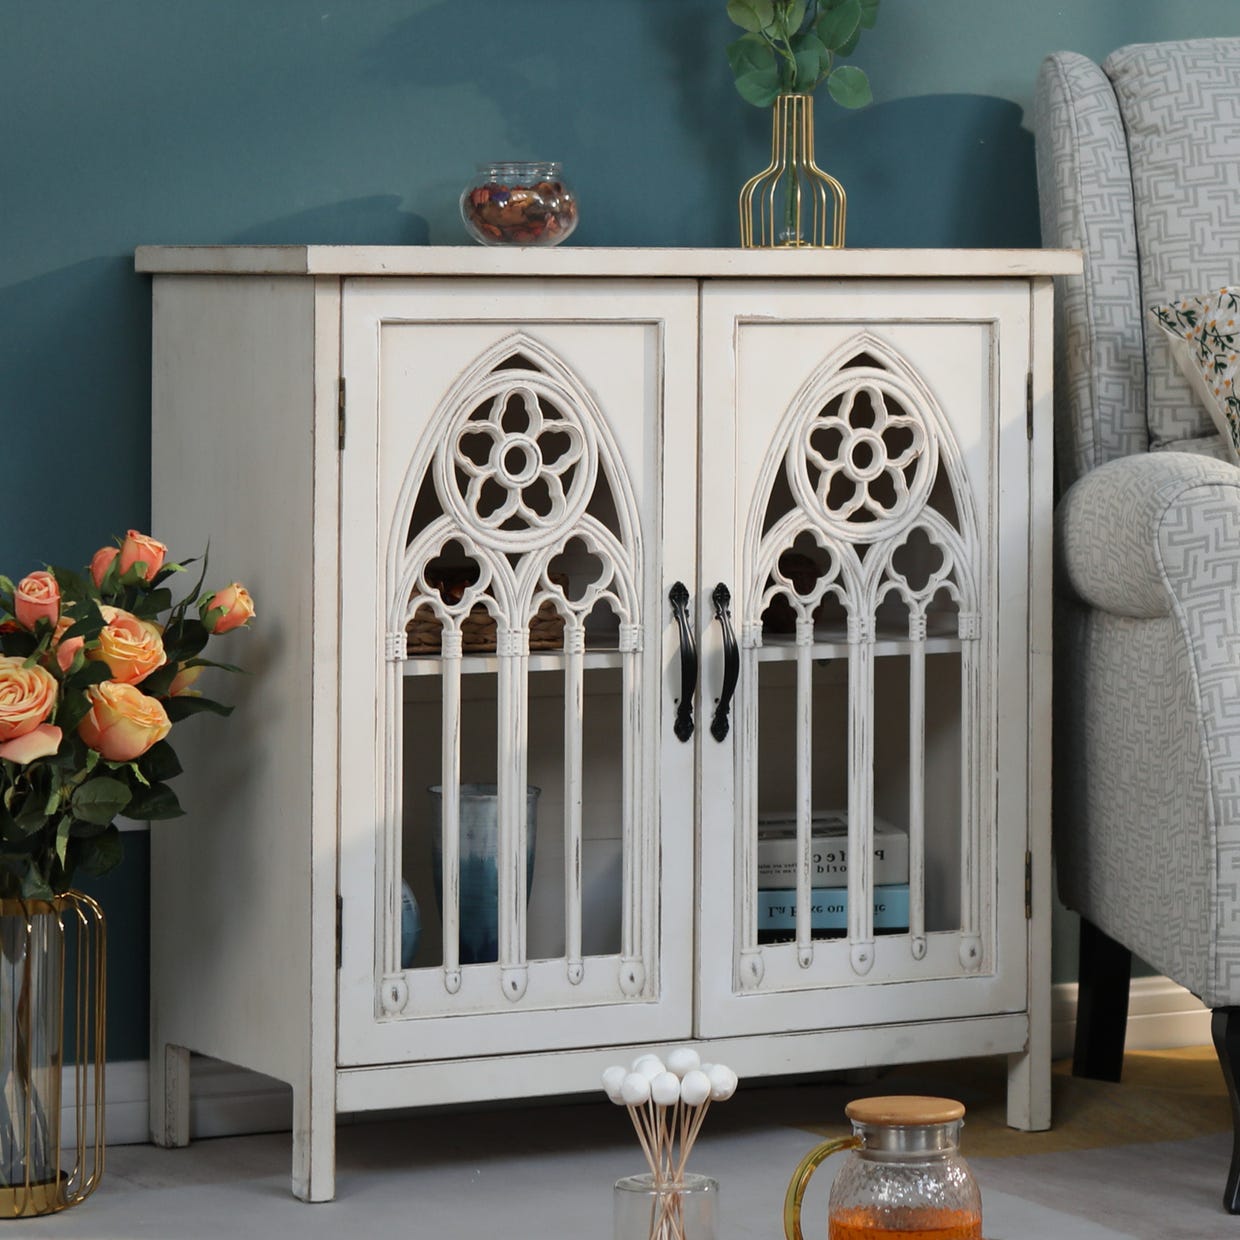 Vintage-style white wooden cabinet with gothic arch glass doors, placed in a room alongside decorative items.